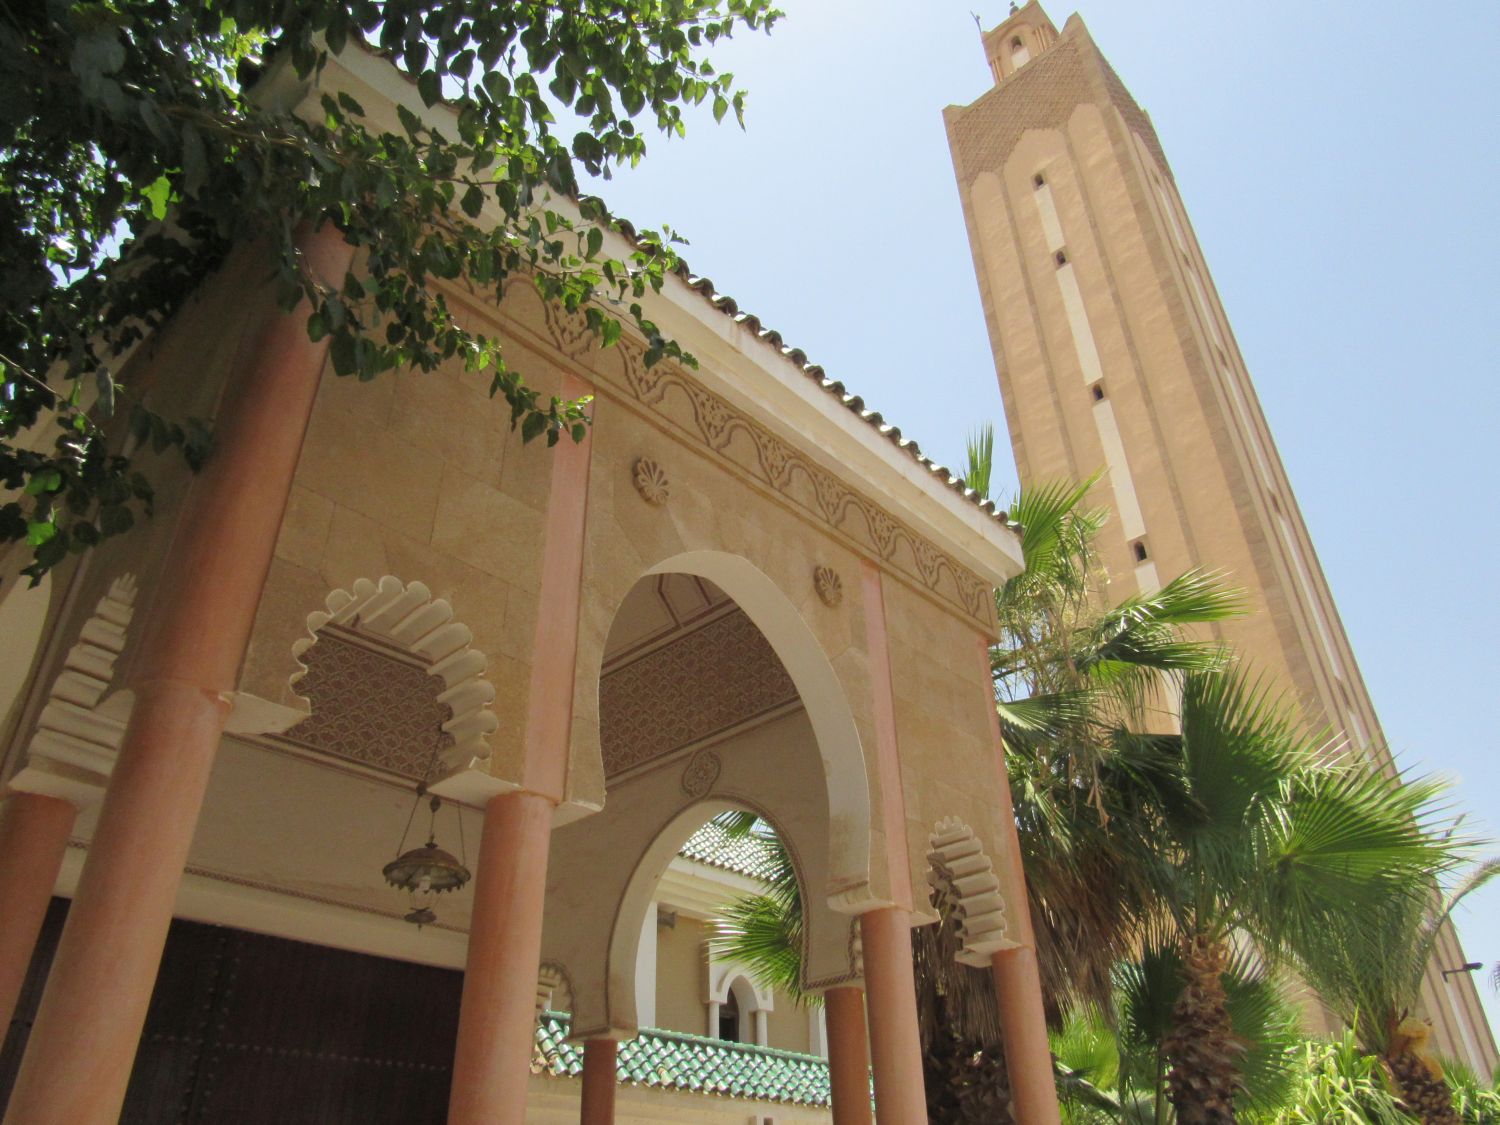 Exterior view from in front of the covered entrance toward the minaret